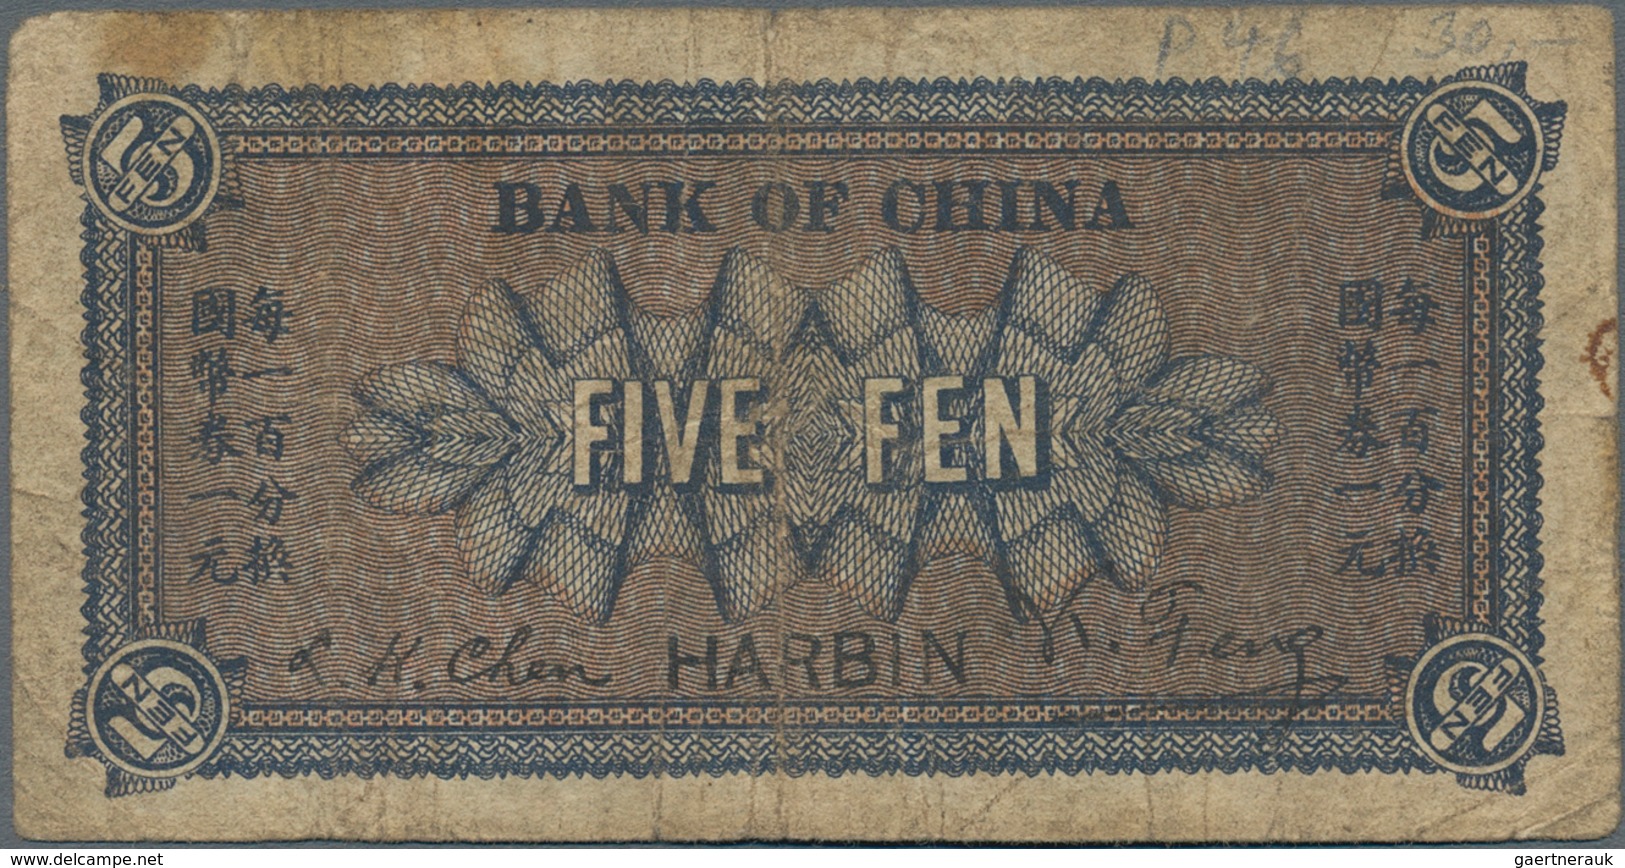 China: Bank Of China HARBIN Branch 5 Fen ND(1918), P.46, Very Rare And Seldom Offered With A Few Sma - China